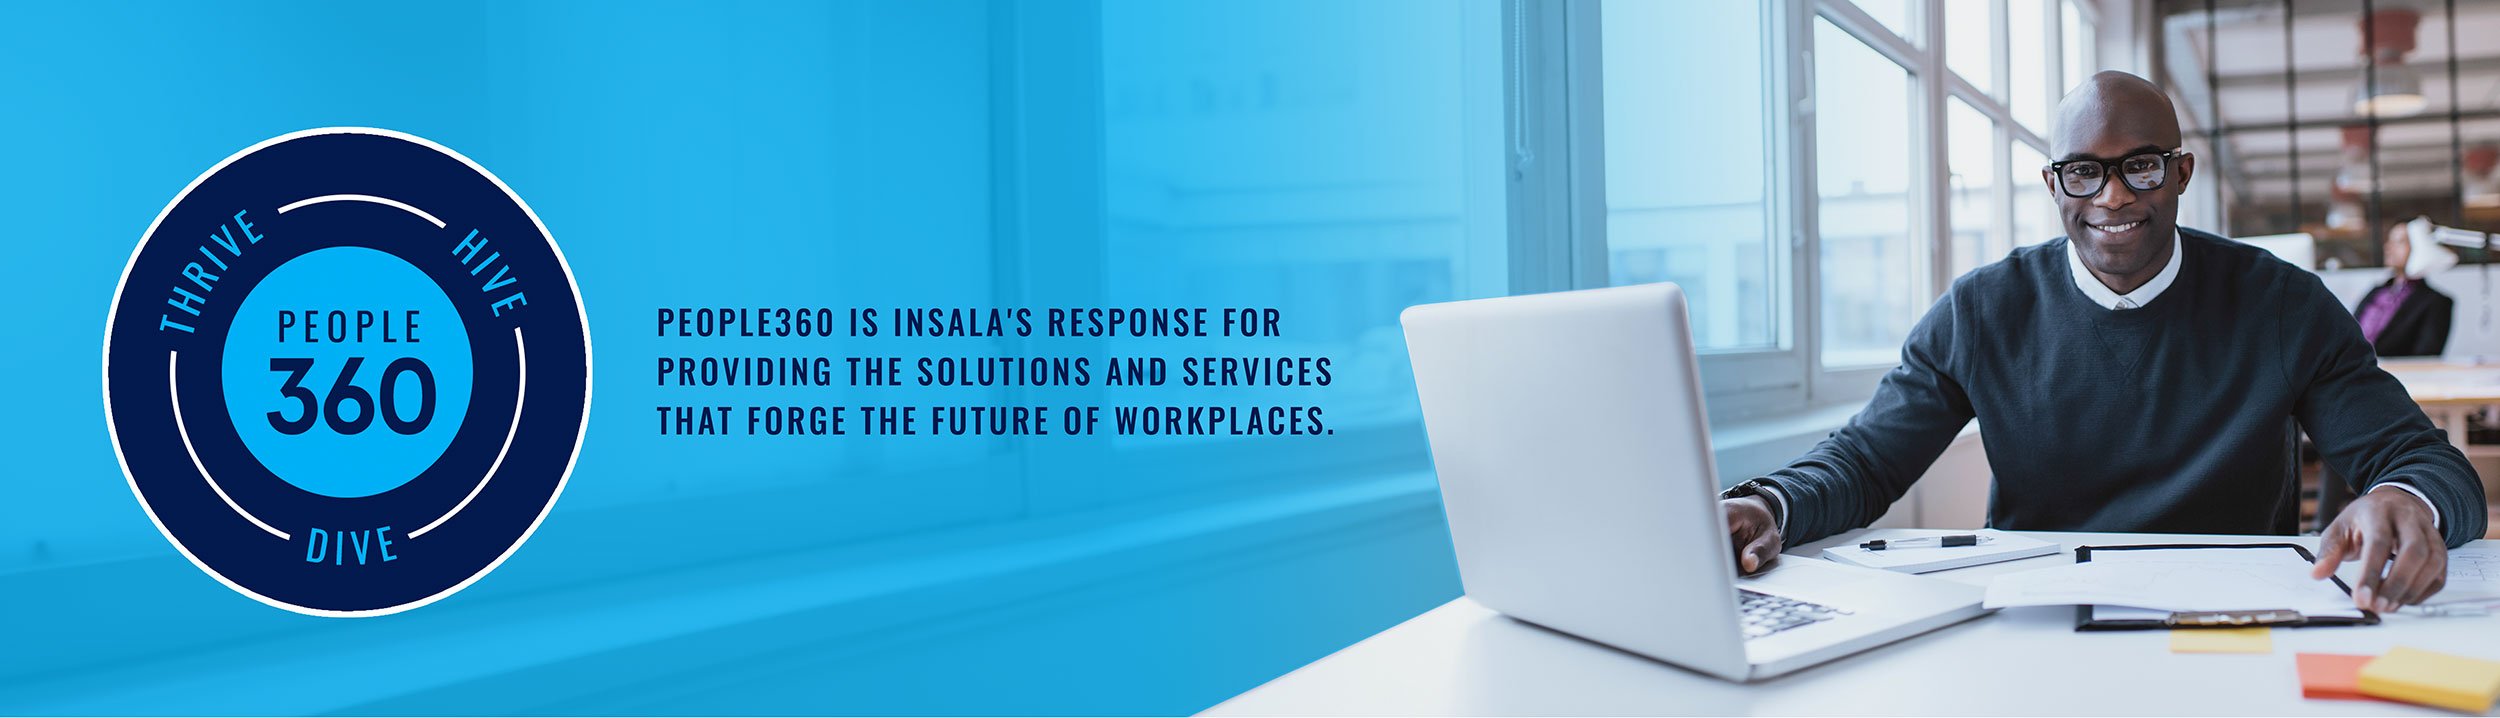 People360 is Insala's response for providing the solutions and services for forging the future of workplaces.